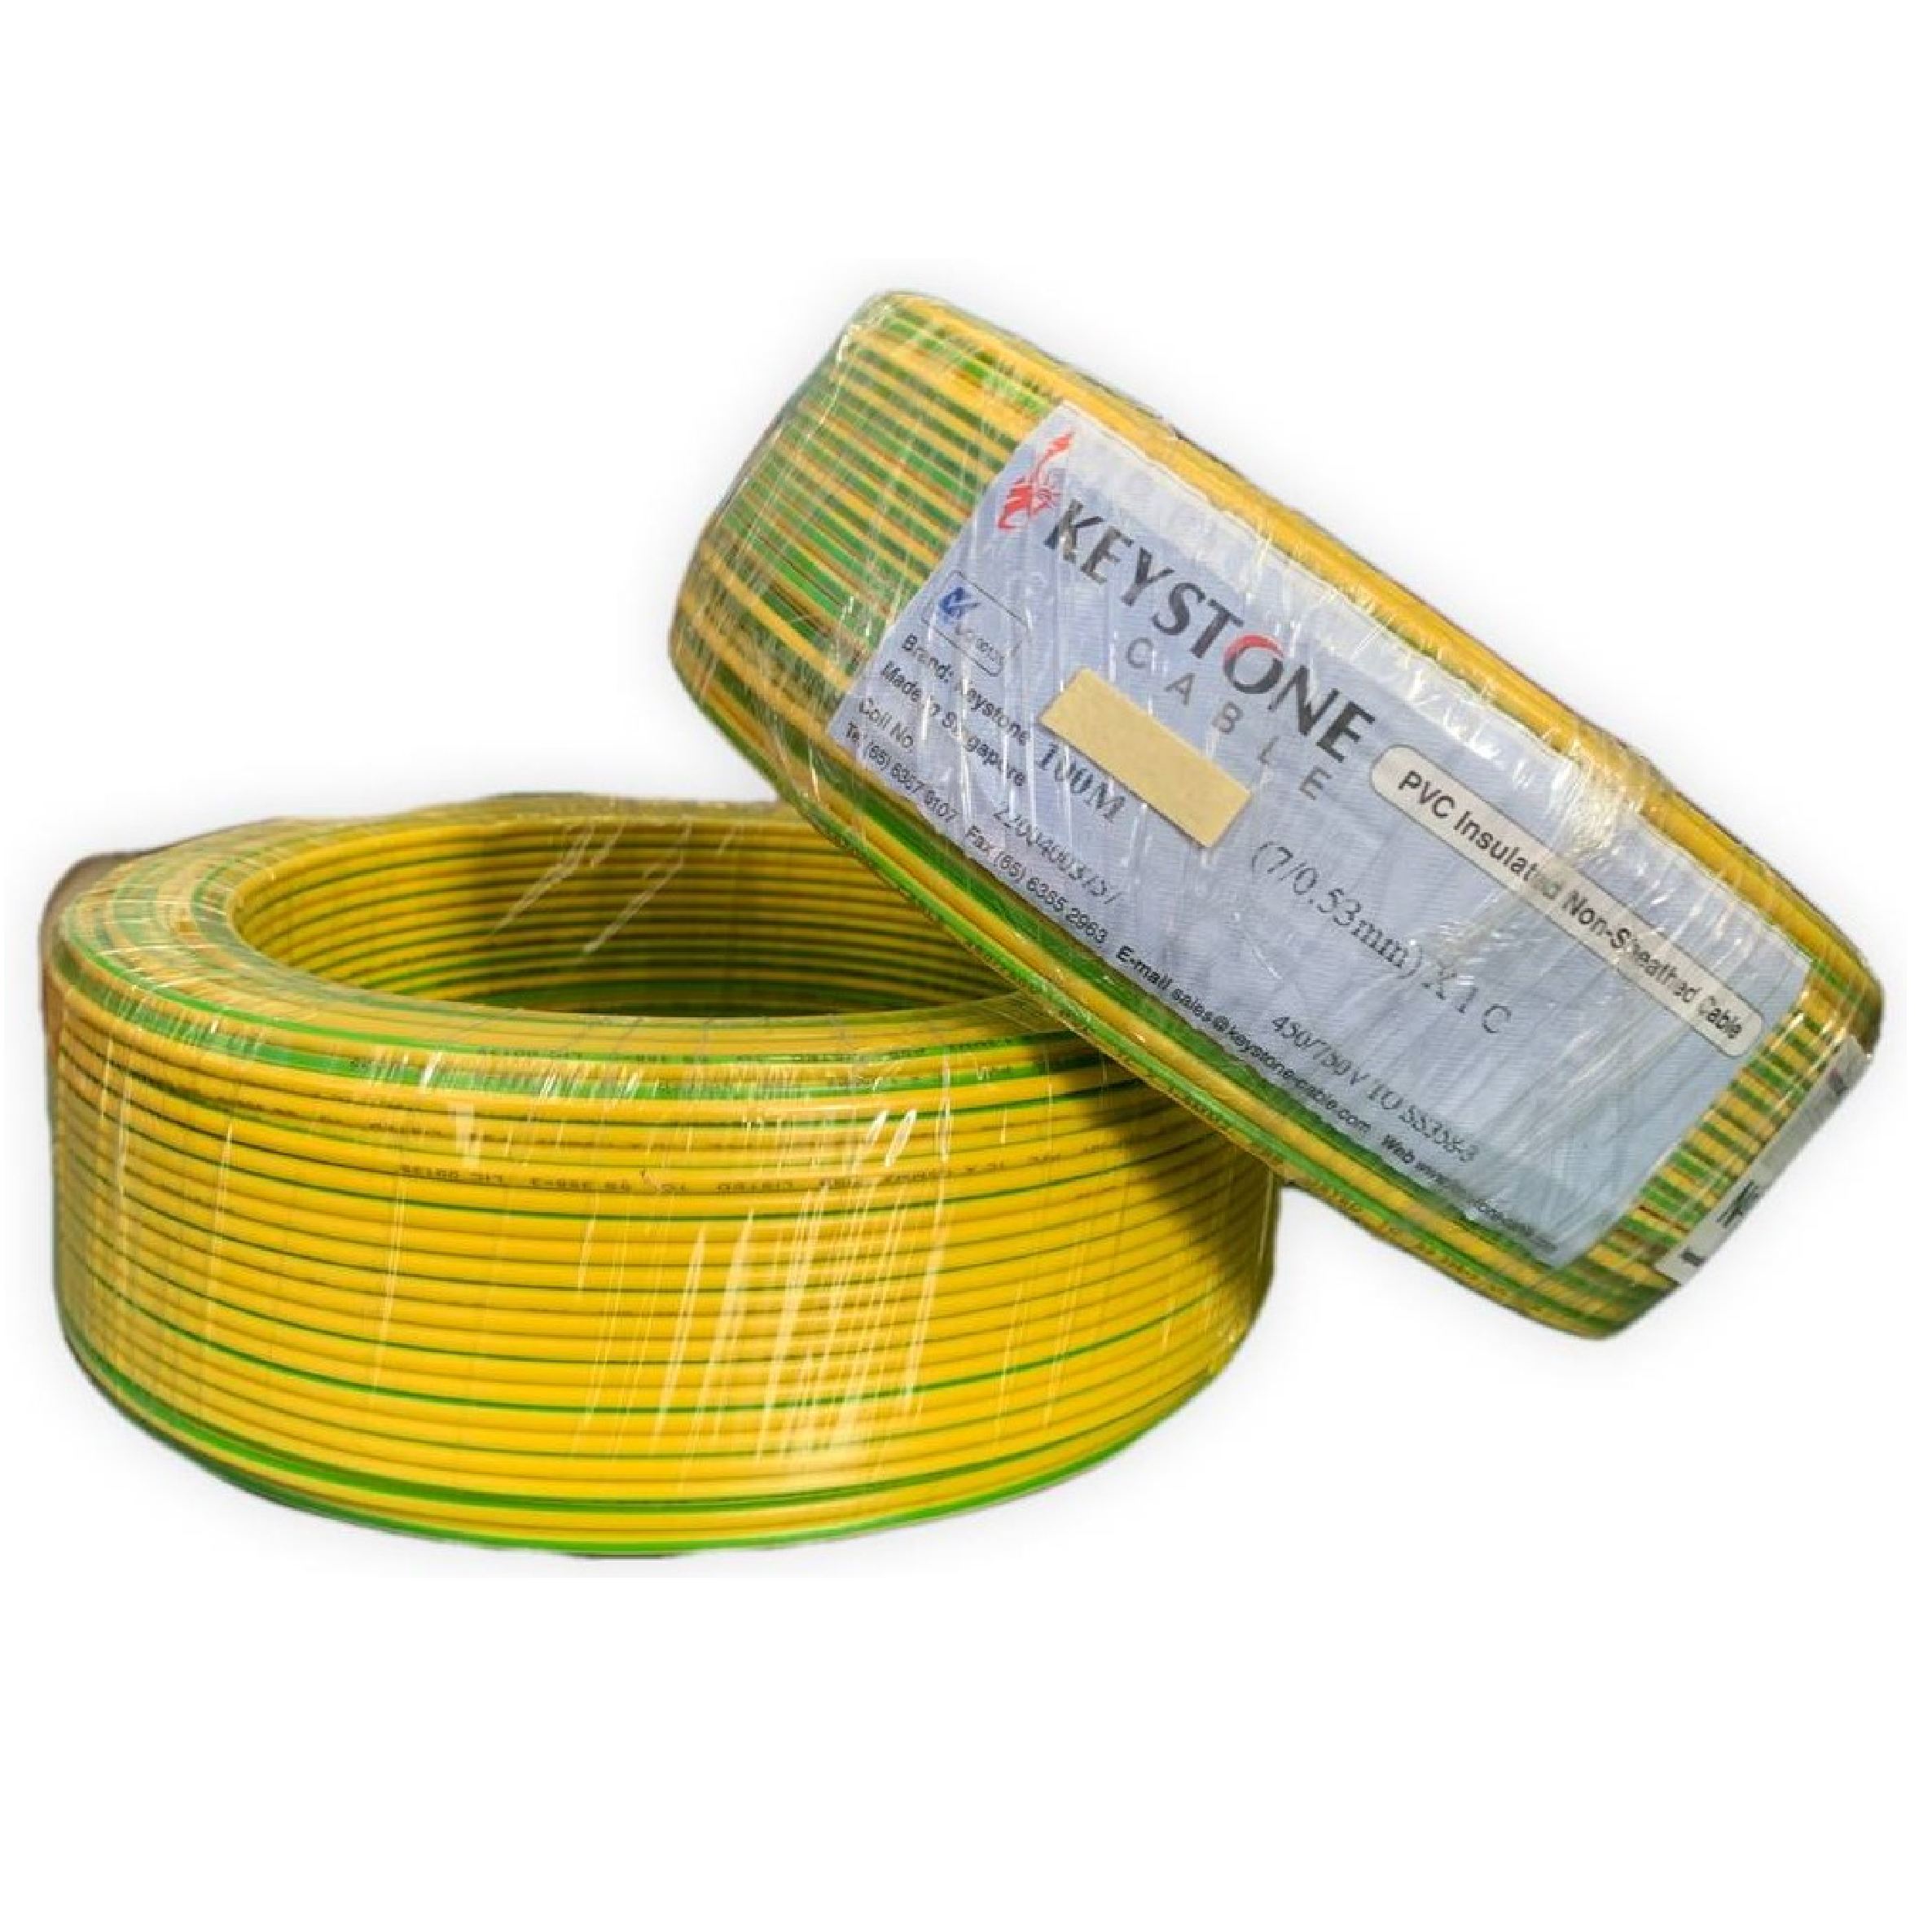 KEYSTONE YELLOW/GREEN PVC Insulated Non-Sheathed Cable 6.0mm2 450/750V ...